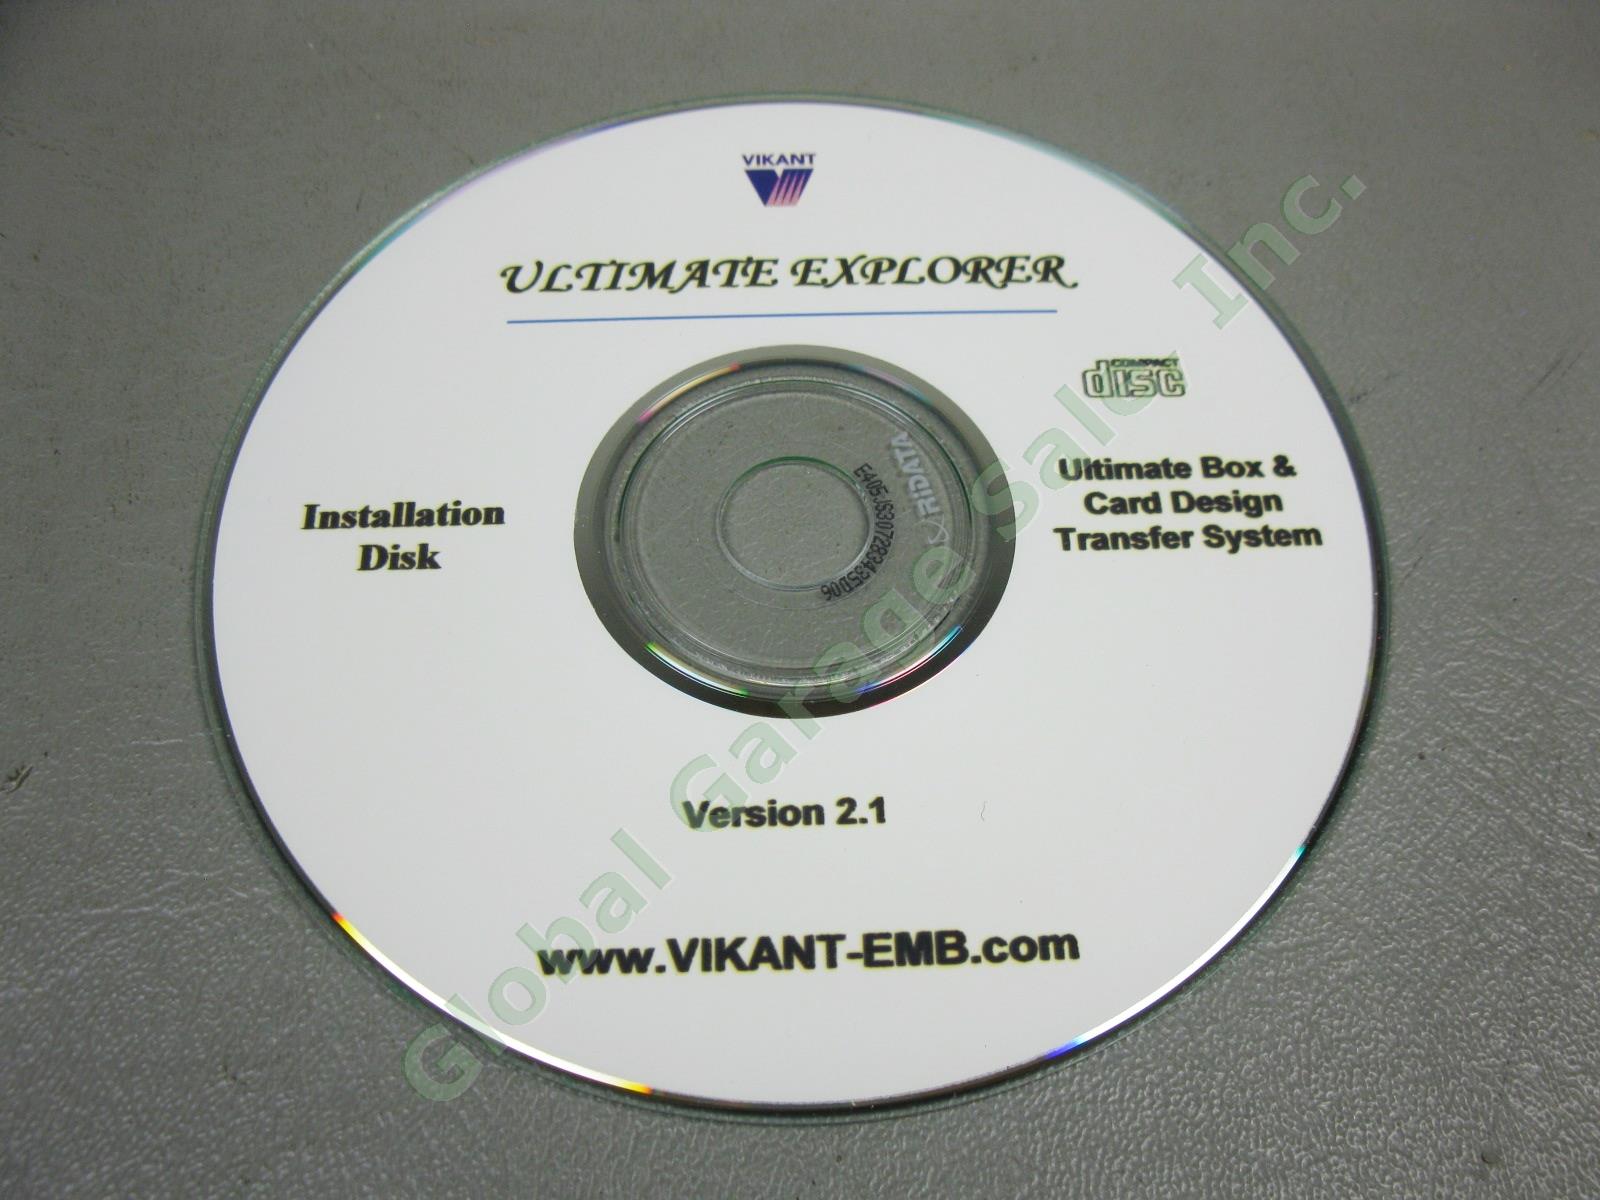 Vikant The Ultimate Box Embroidery Designs USB Transfer System + Card CD-ROM Lot 6